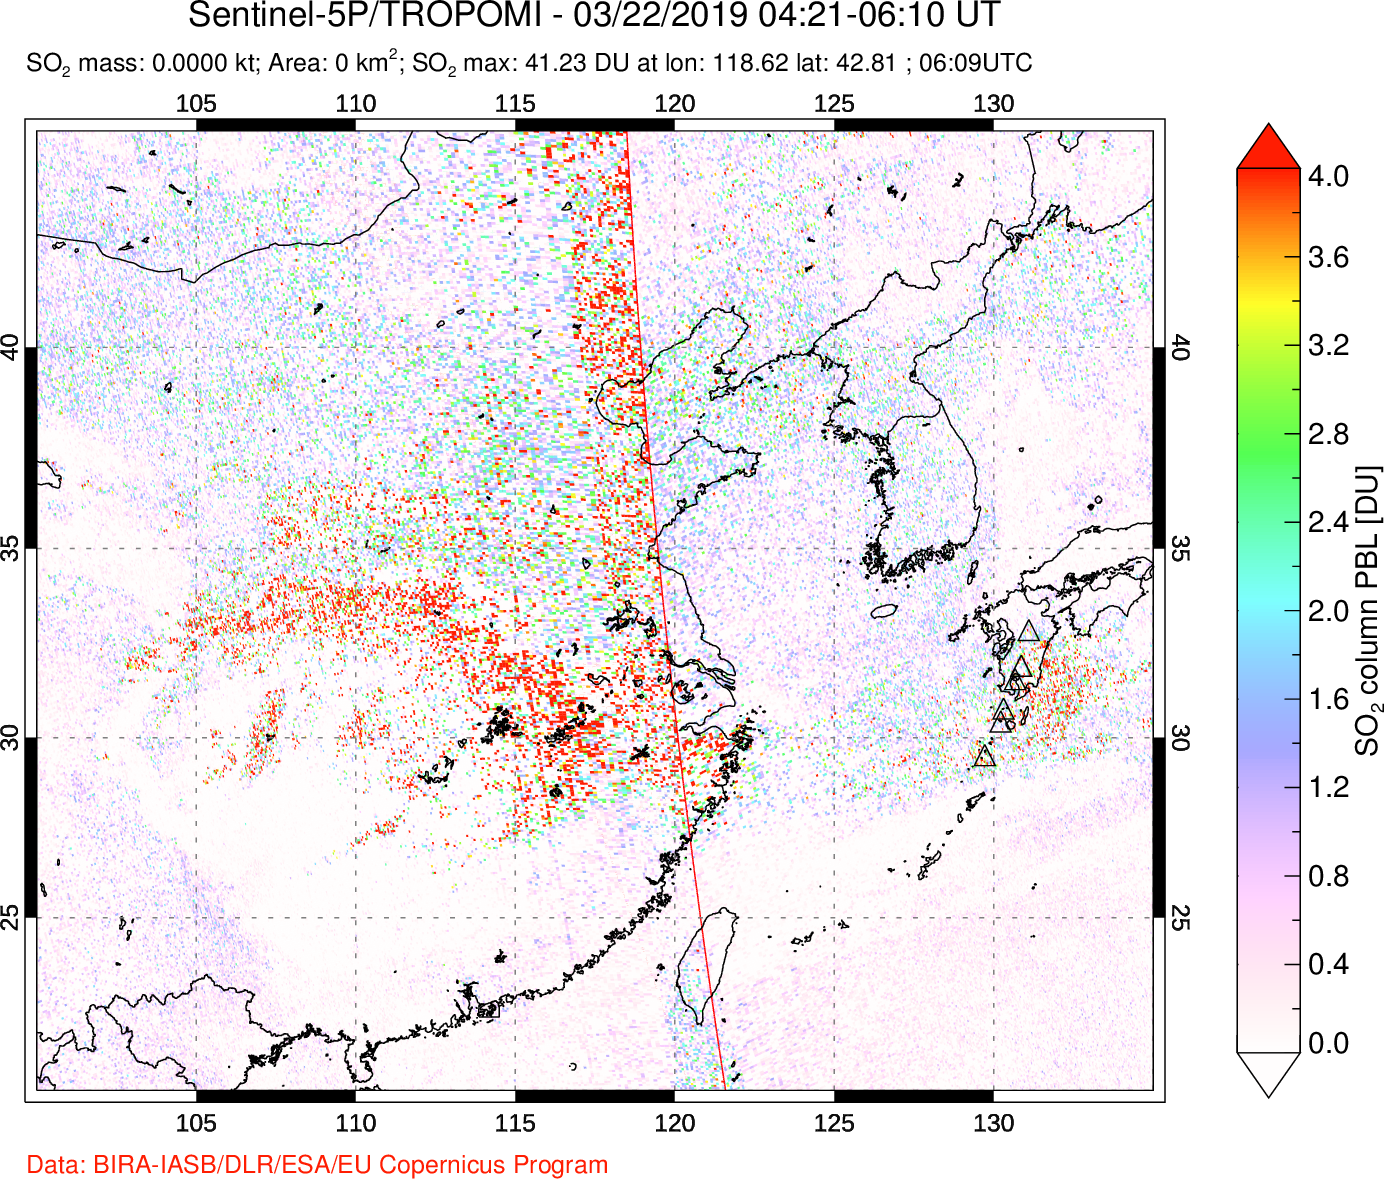 A sulfur dioxide image over Eastern China on Mar 22, 2019.